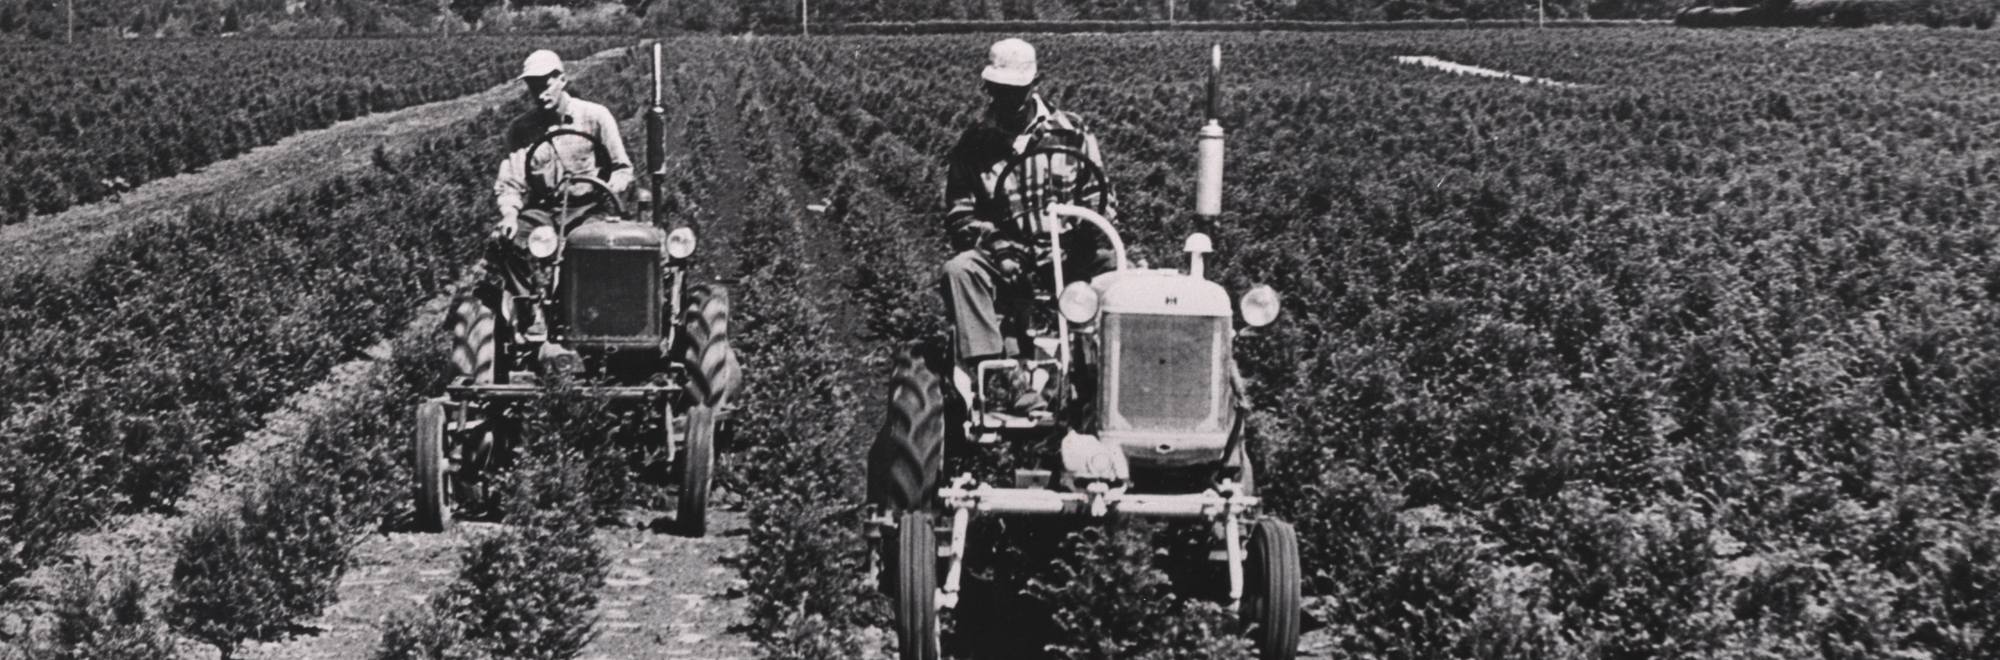 men on tractors in an agricultural field